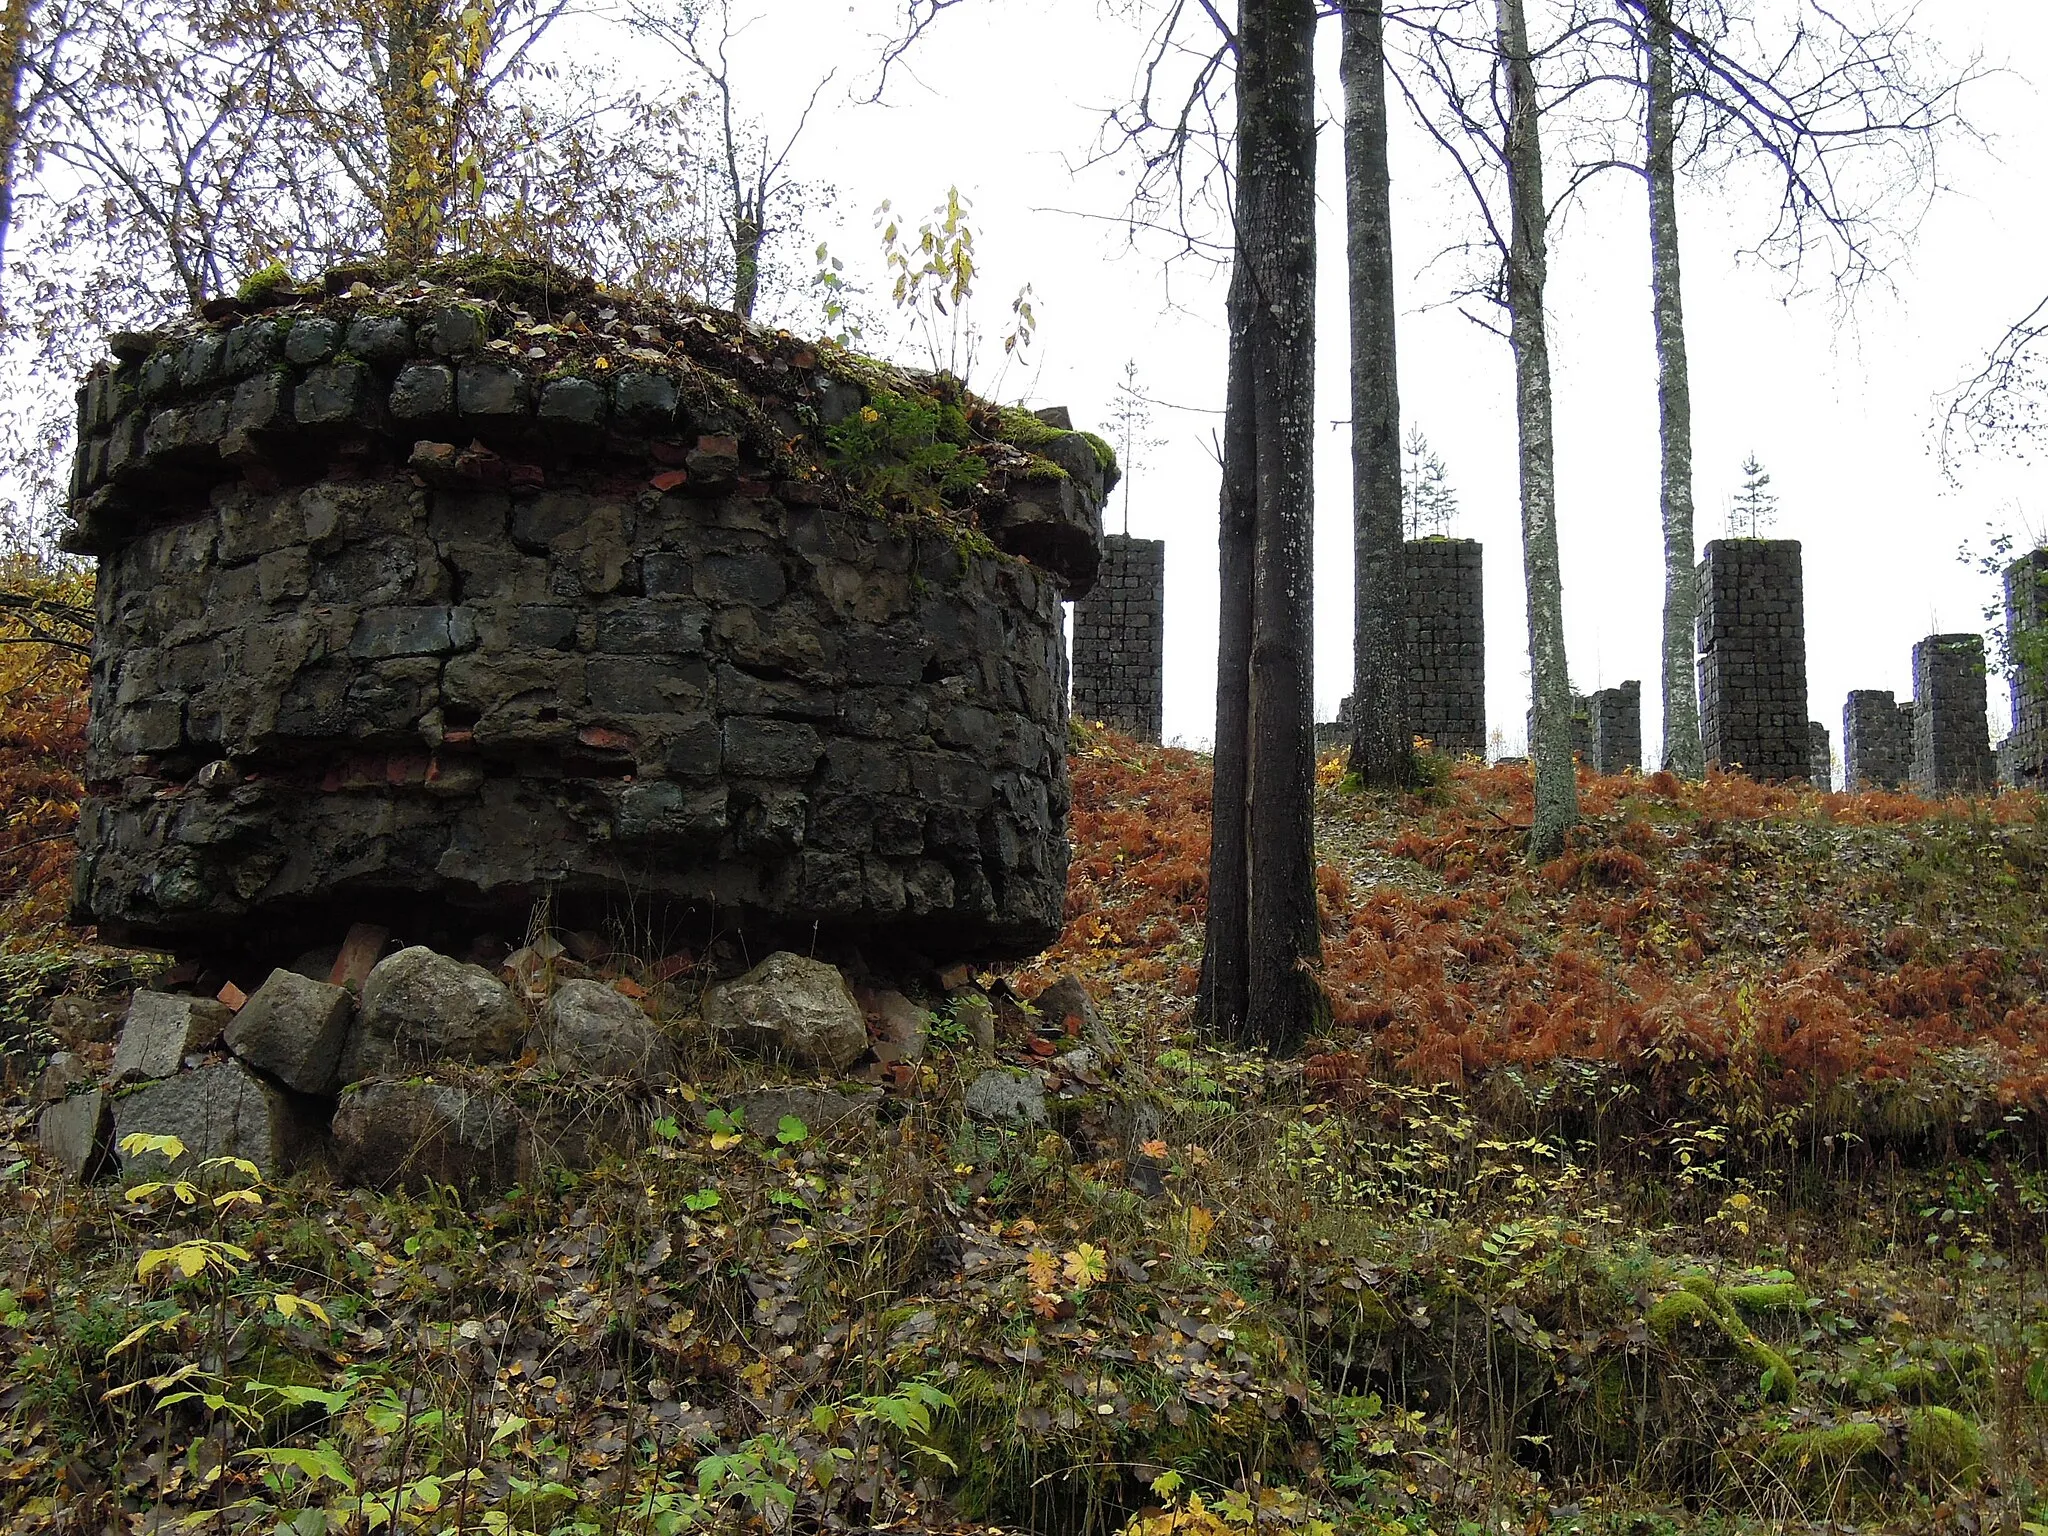 Photo showing: Remnants in year 2012 from the ironworks ”Trummelsbergs bruk” in Fagersta Municipality in Västmanland, Sweden. The ironworks was in operation 1866 – 1907. The stone cylinder was the lower part of the ore-roasting kiln and the stone pillars were supporting the roof of the gigantic charcoal store.